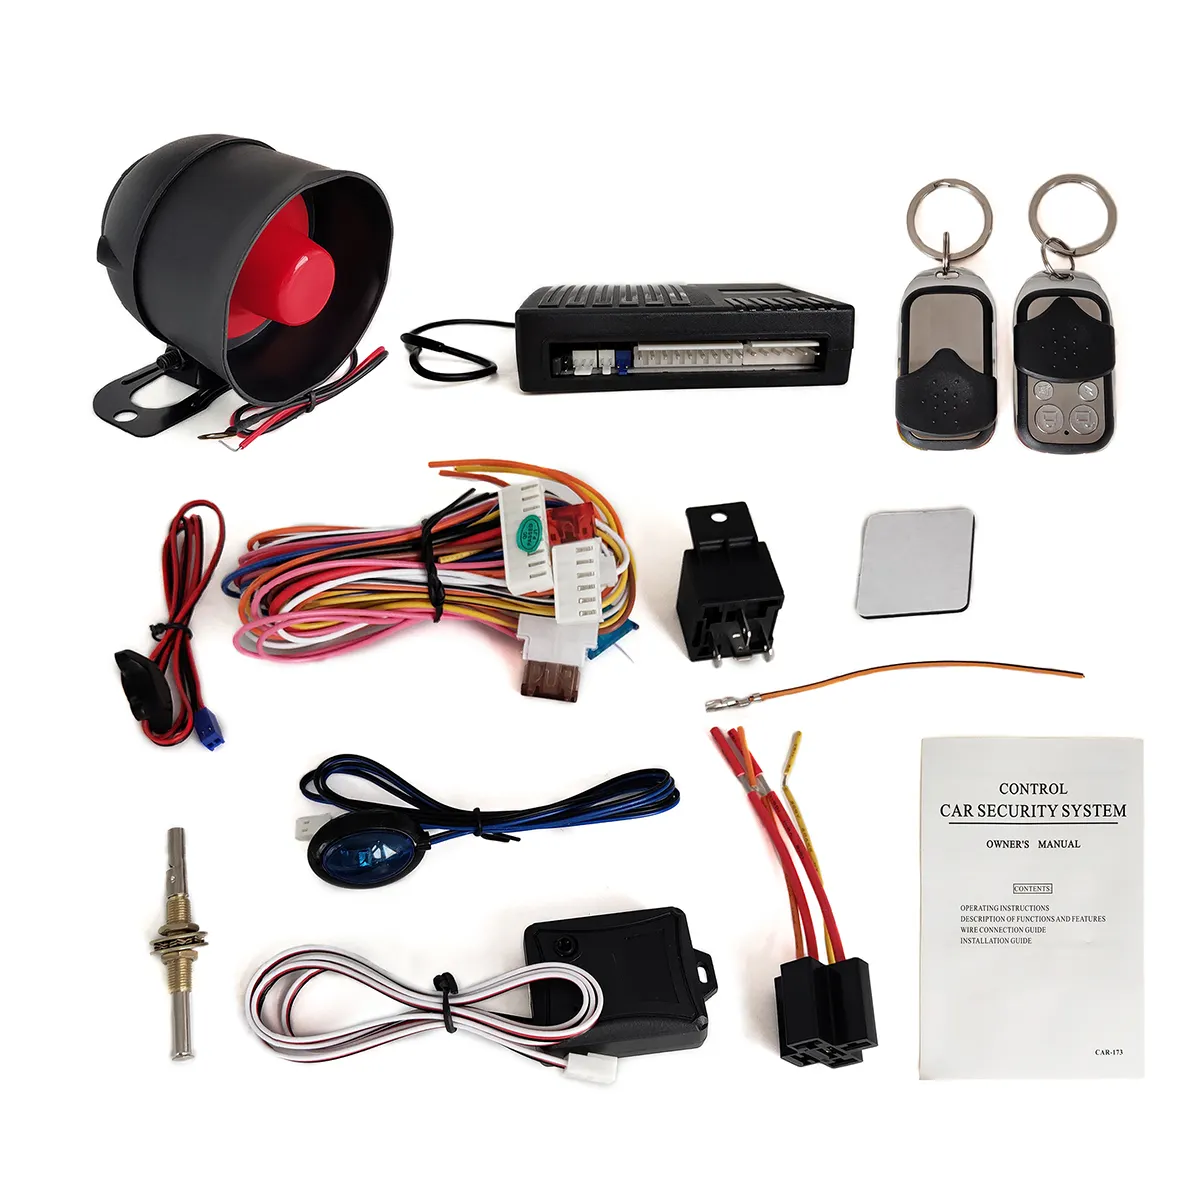 Easy install Immobilizer system one way alarm vehicle security car alarm for car with keyless entry function